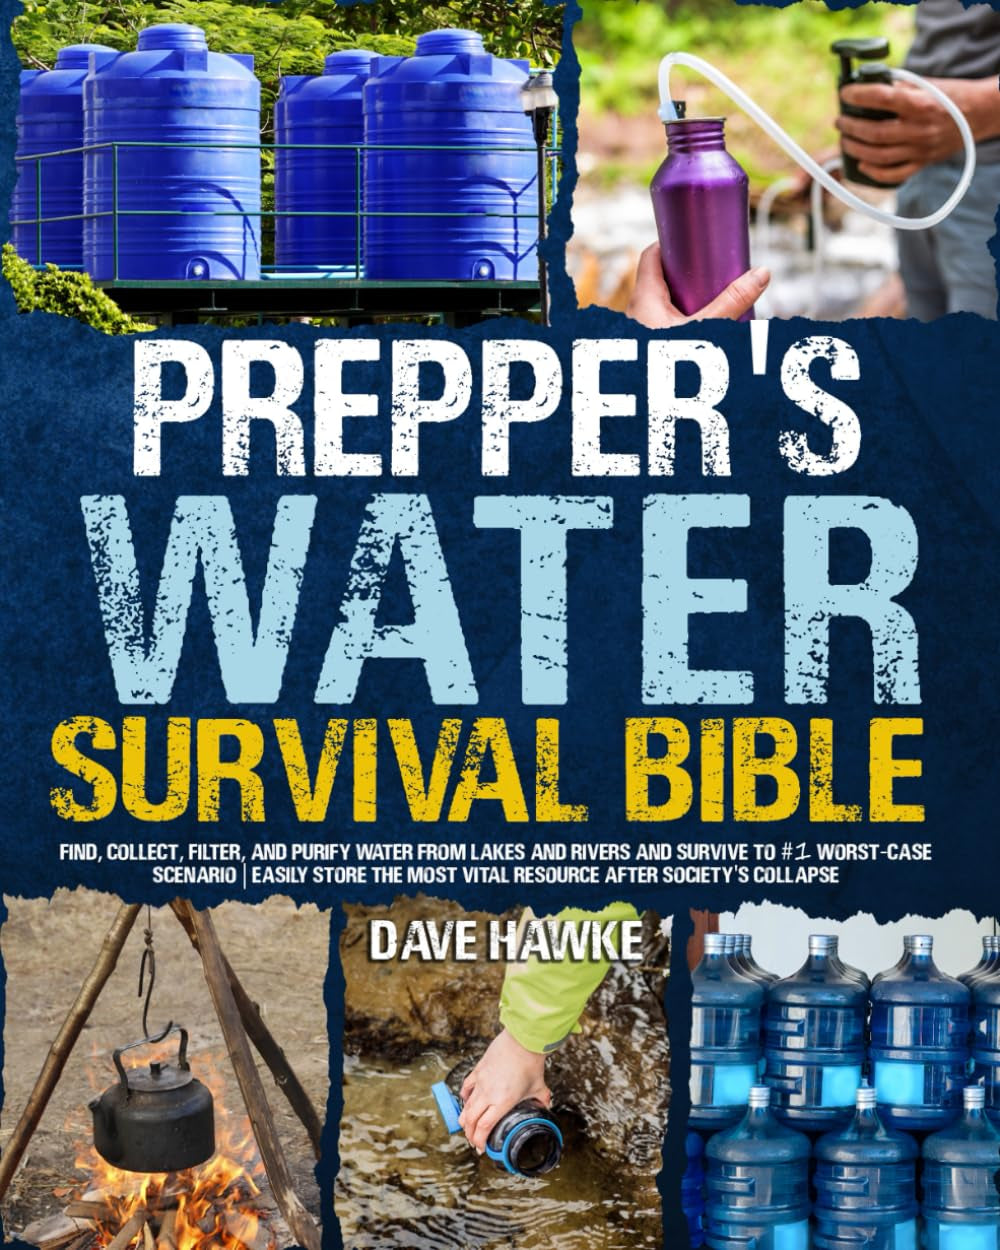 The Prepper's Water Survival Bible